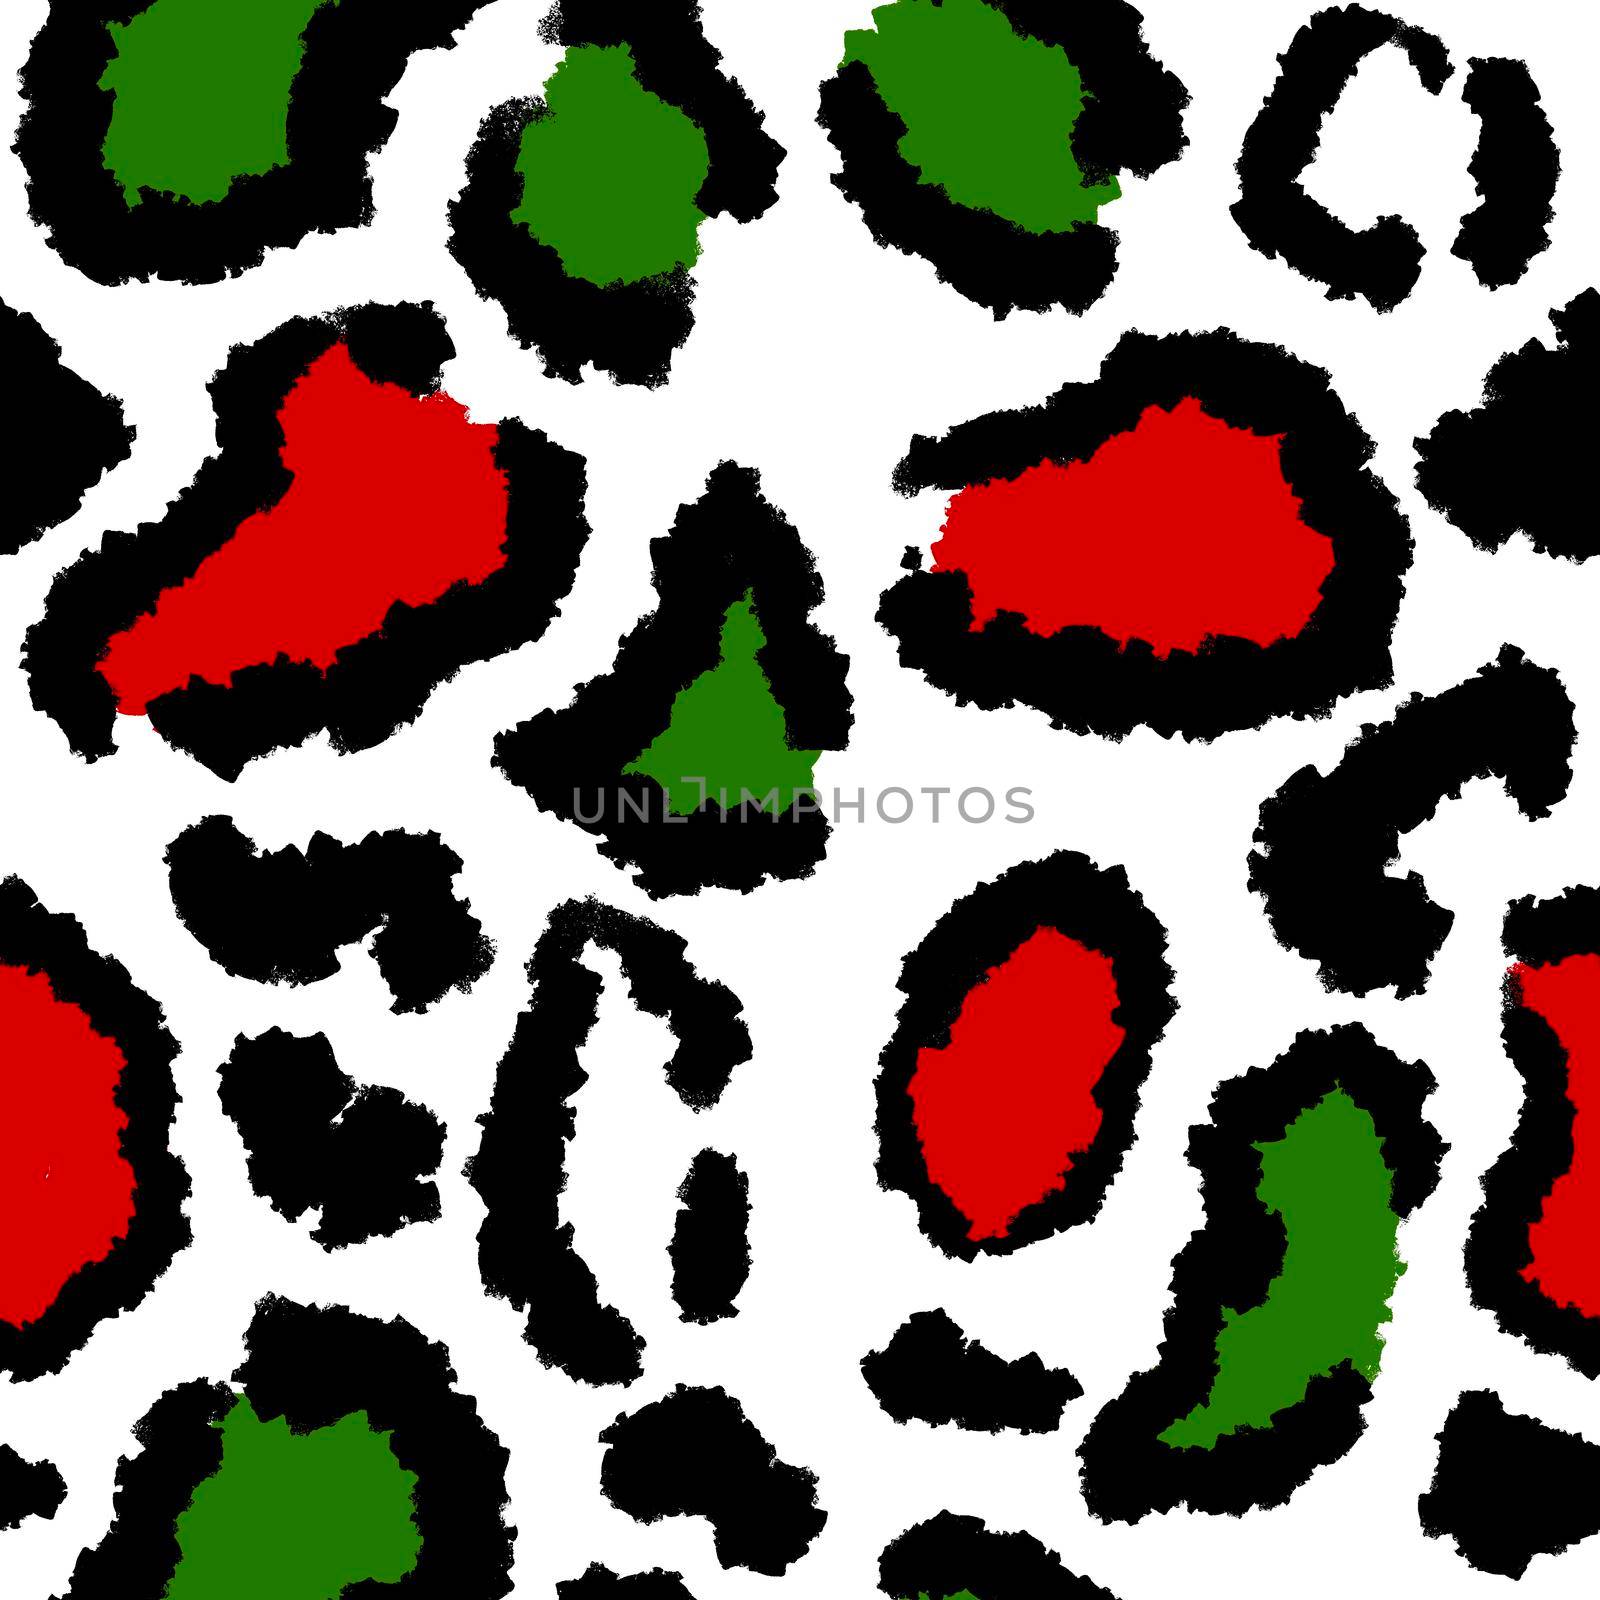 Hand drawn seamless green red christmas leopard pattern, festive wild cheetah background, animal fur skin print. December wrapping holiday paper, invitations cards design